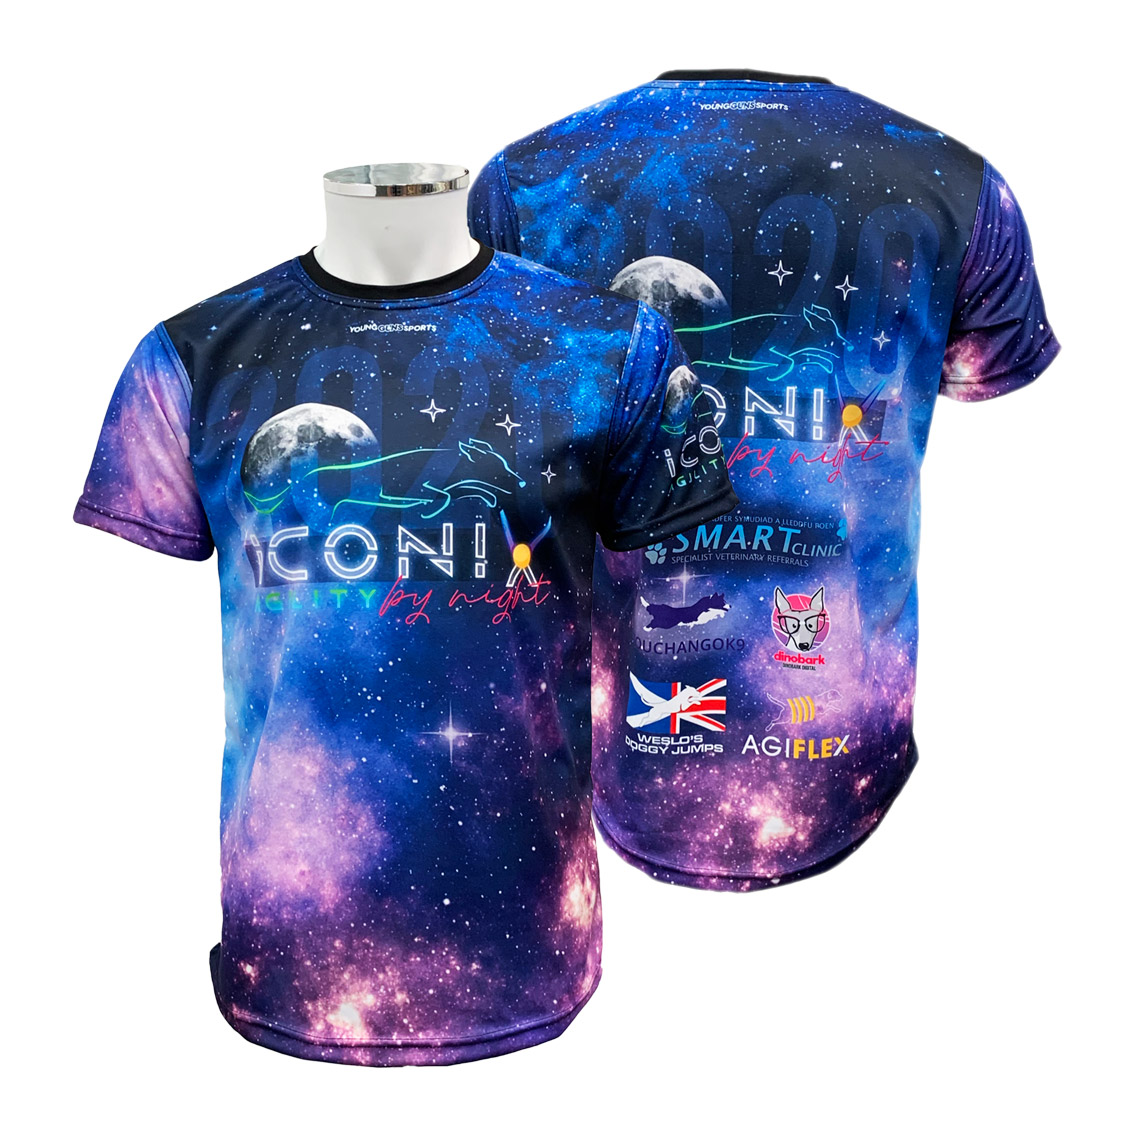 Iconix By Night Dye-Sublimated T-Shirt – Young Guns Sports